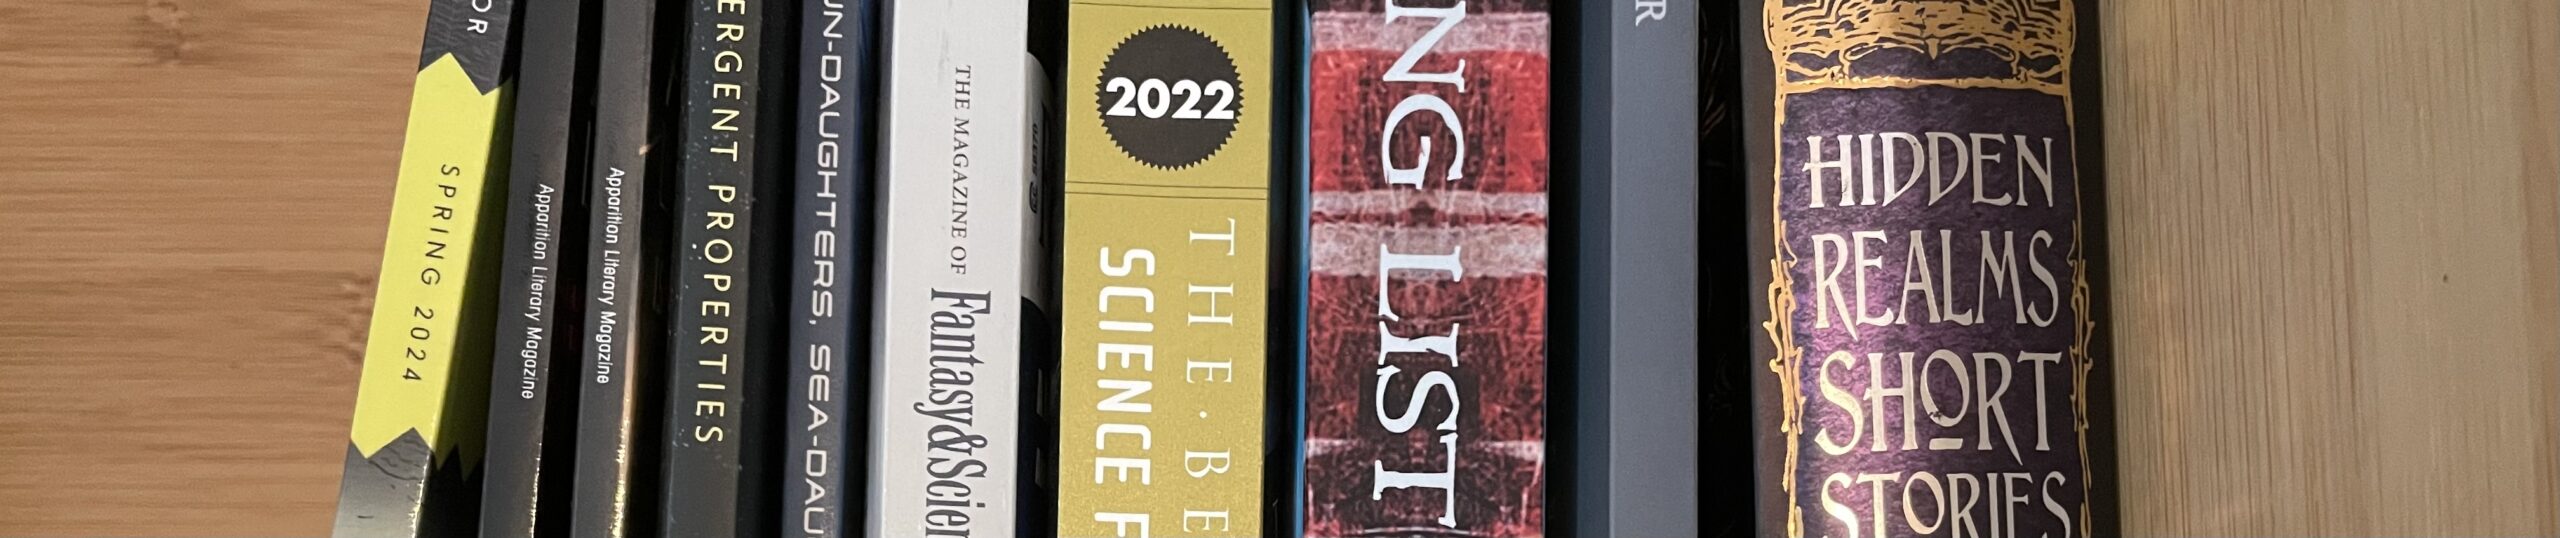 Shelf of books: an issue of Weird Horror, two issues of Apparition Lit, F&SF, 2022 Best American SFF, Long List Anthology, Local Star, and Hidden Worlds collection from Flame Tree Press